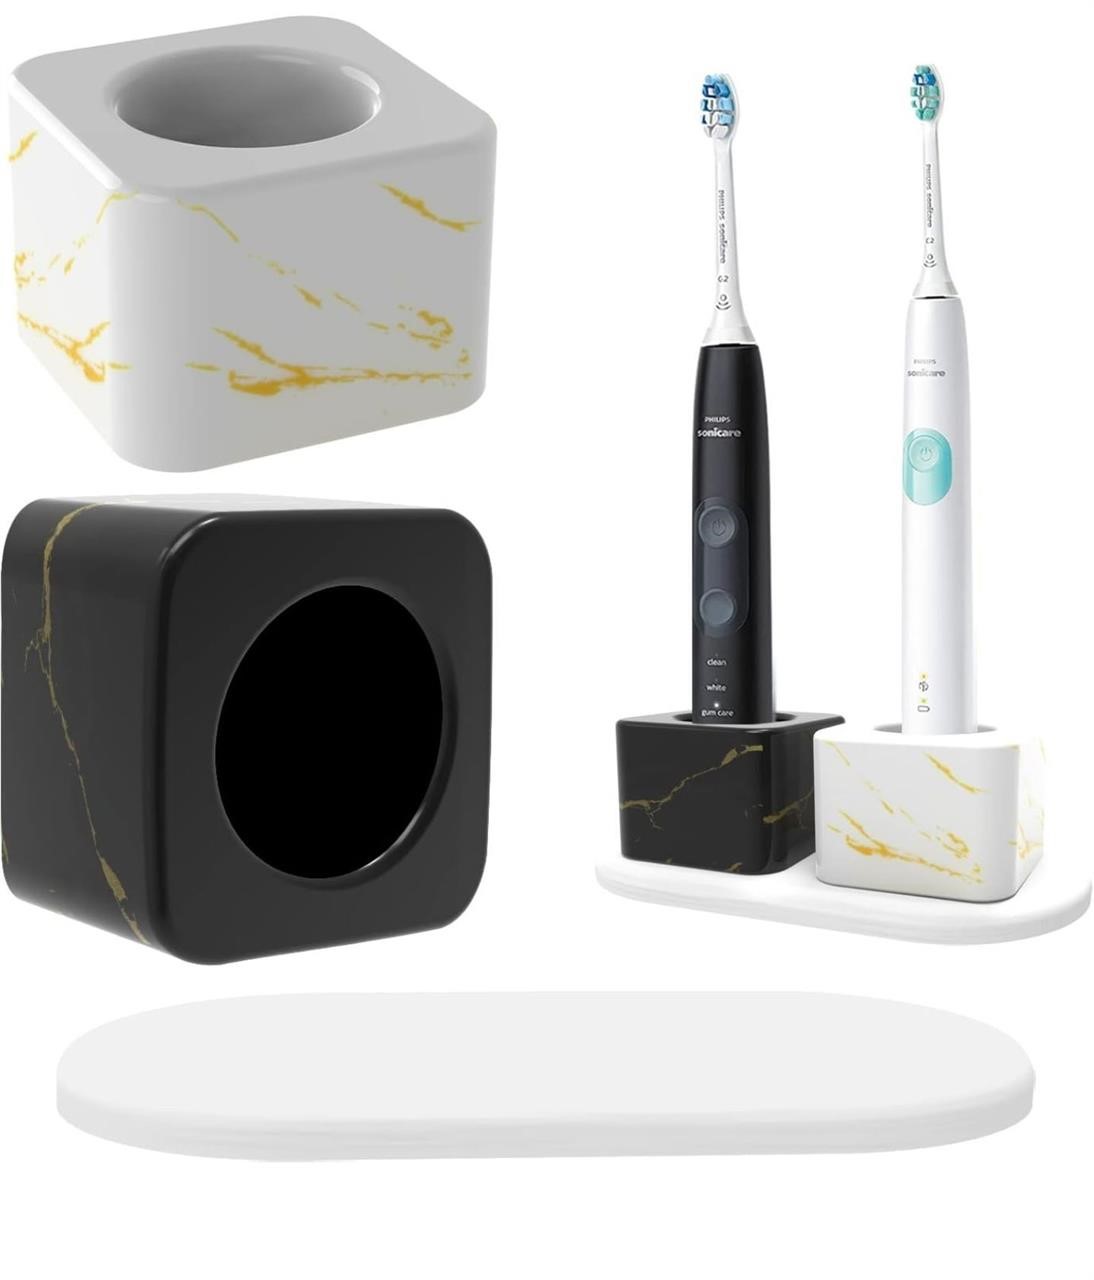 ($26) Linkidea Mini Electric Toothbrush H